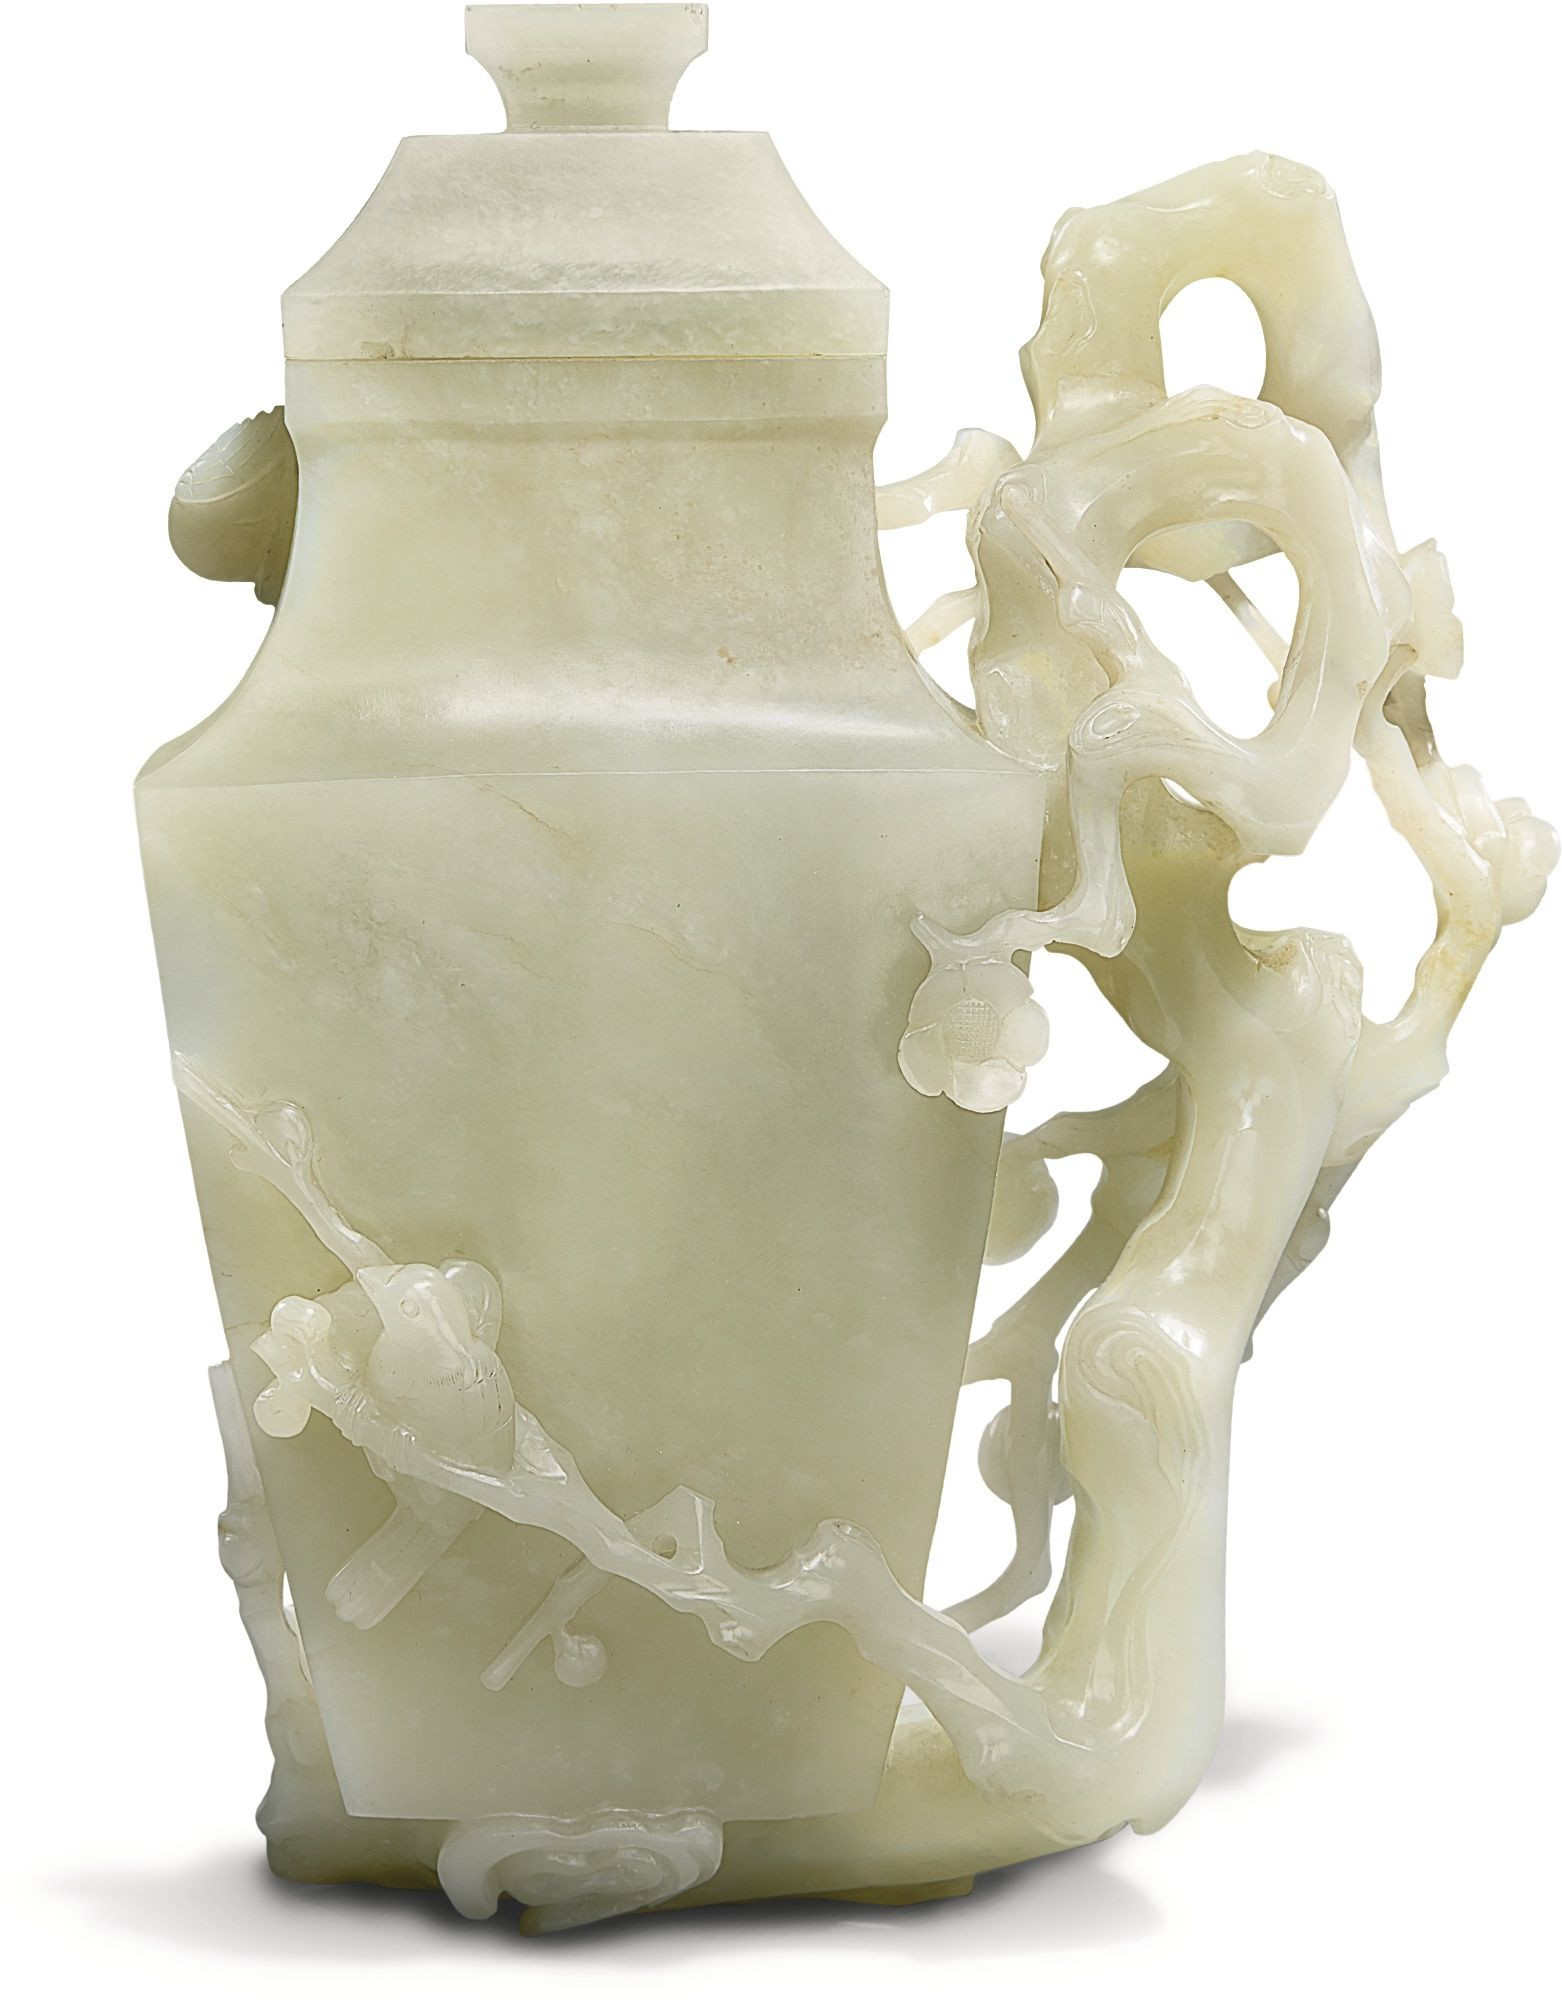 30 Fashionable Qianlong Vase Value 2024 free download qianlong vase value of a pale celadon jade bird and prunus vase and cover qing dynasty within a pale celadon jade bird and prunus vase and cover qing dynasty qianlong period